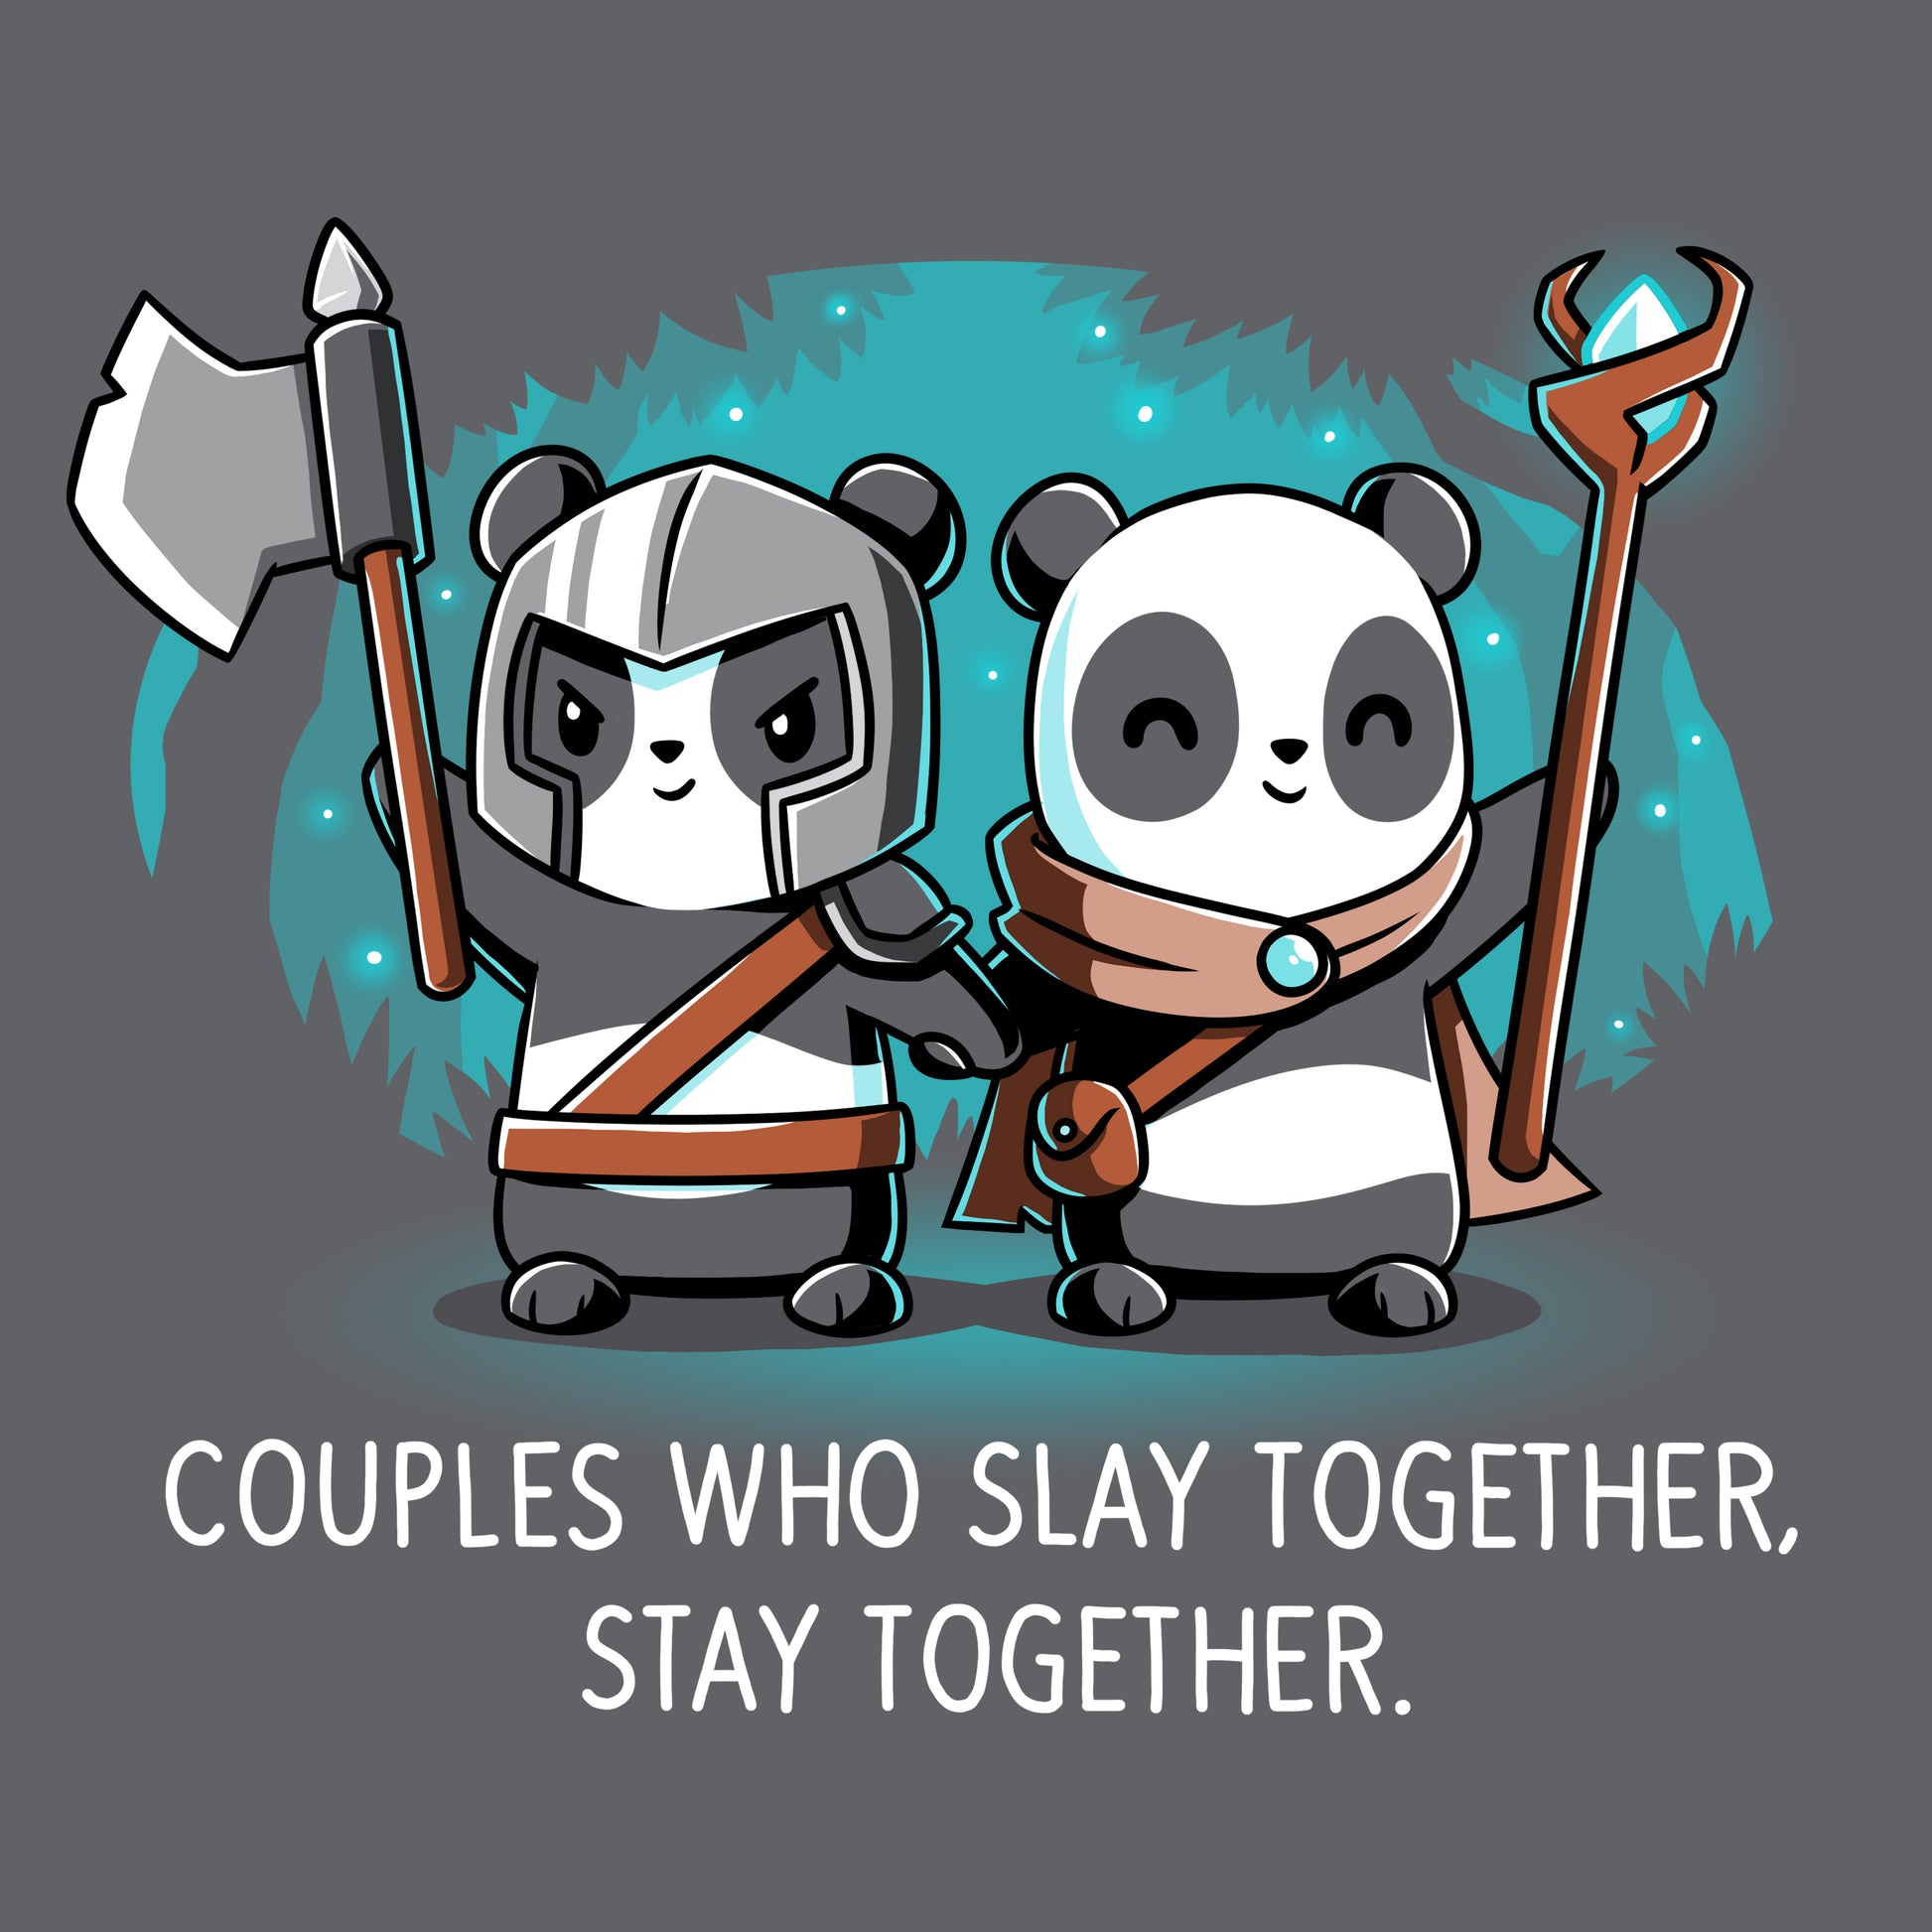 Couples who play "Couples Who Slay Together Stay Together" by TeeTurtle together, stay together.